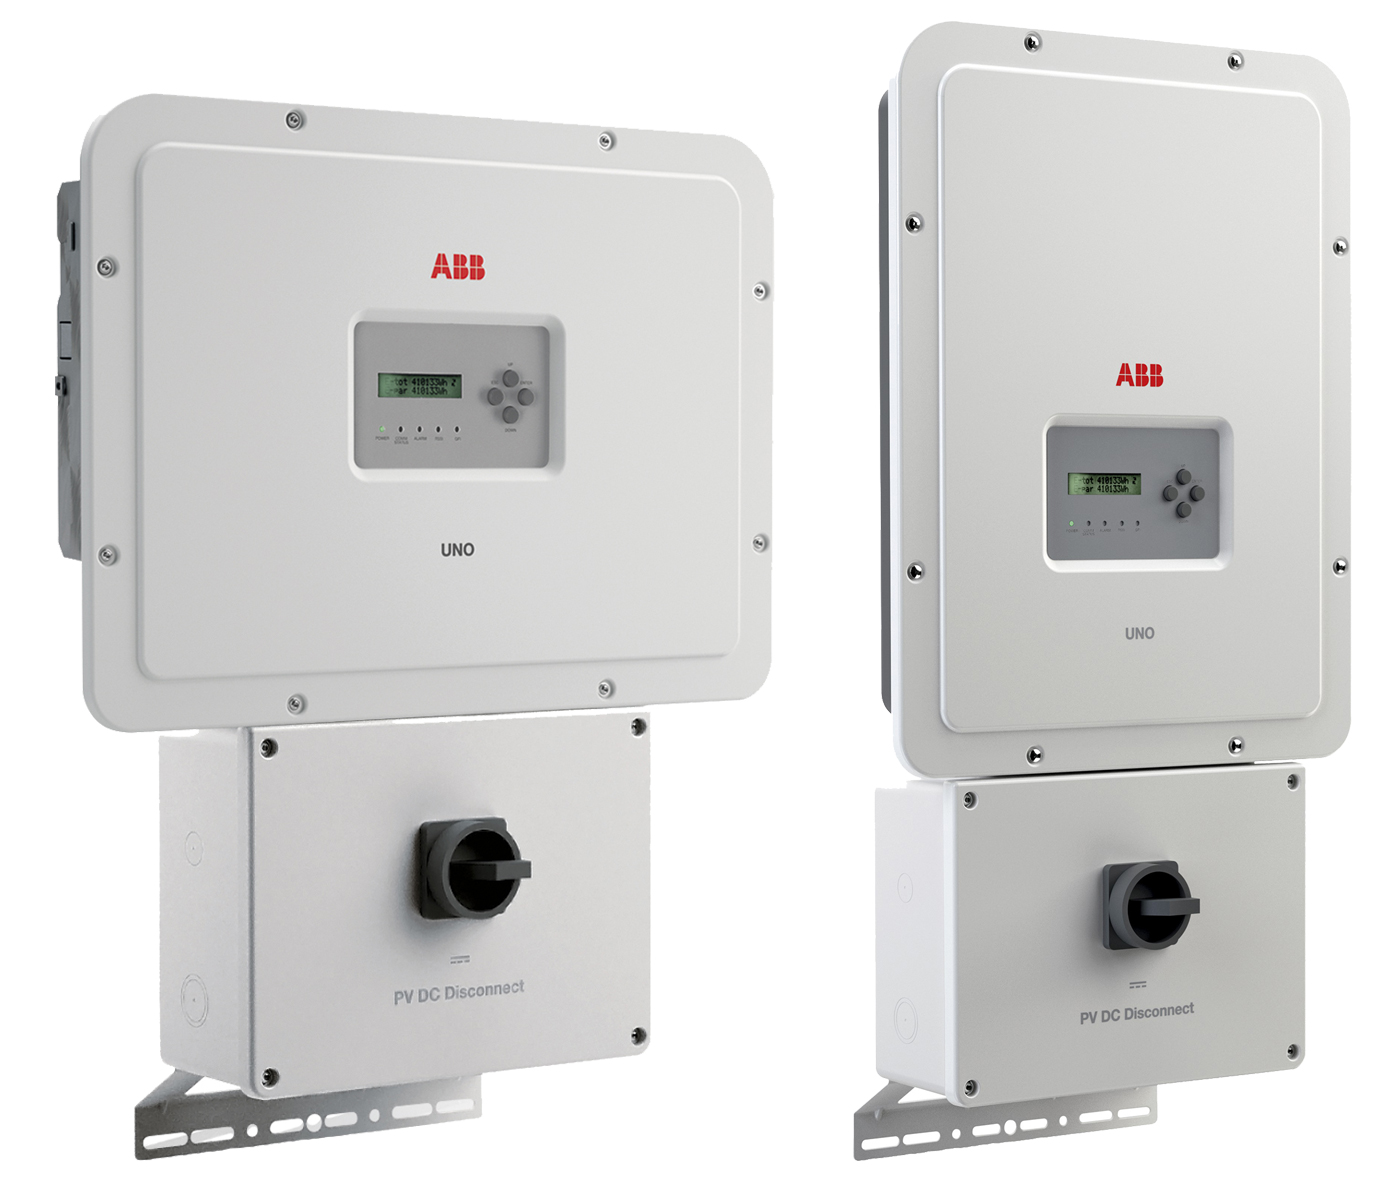 Residential Solar Inverter Series Available in Five Power Ratings From 3.3 to 6.0kW